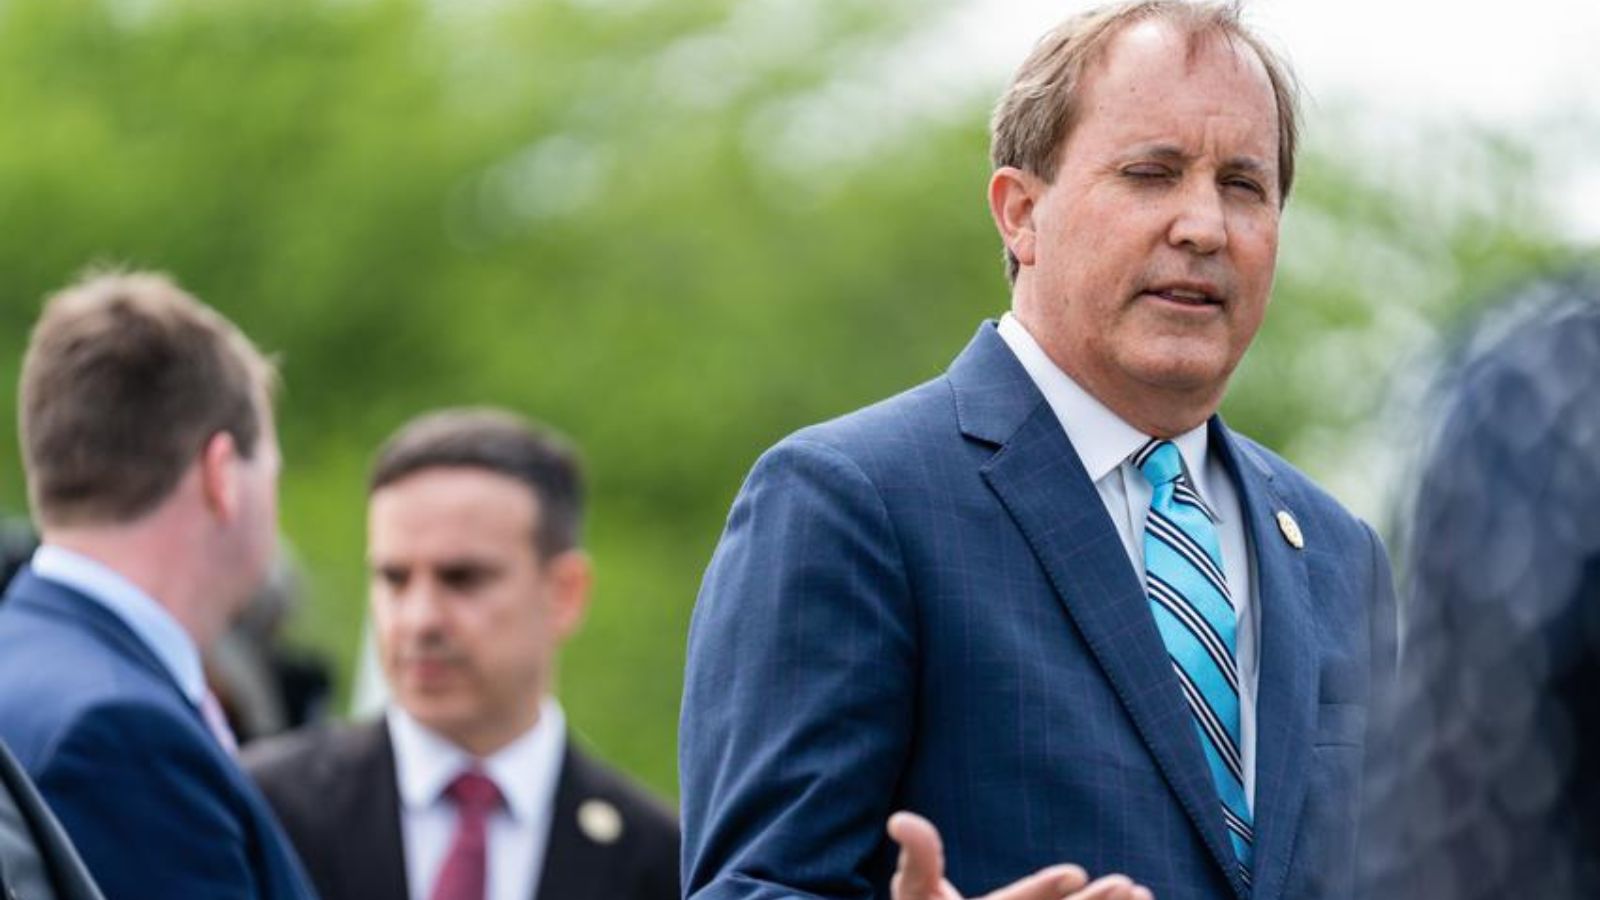 7/28 Texas AG Paxton won’t issue legal opinion on invasion